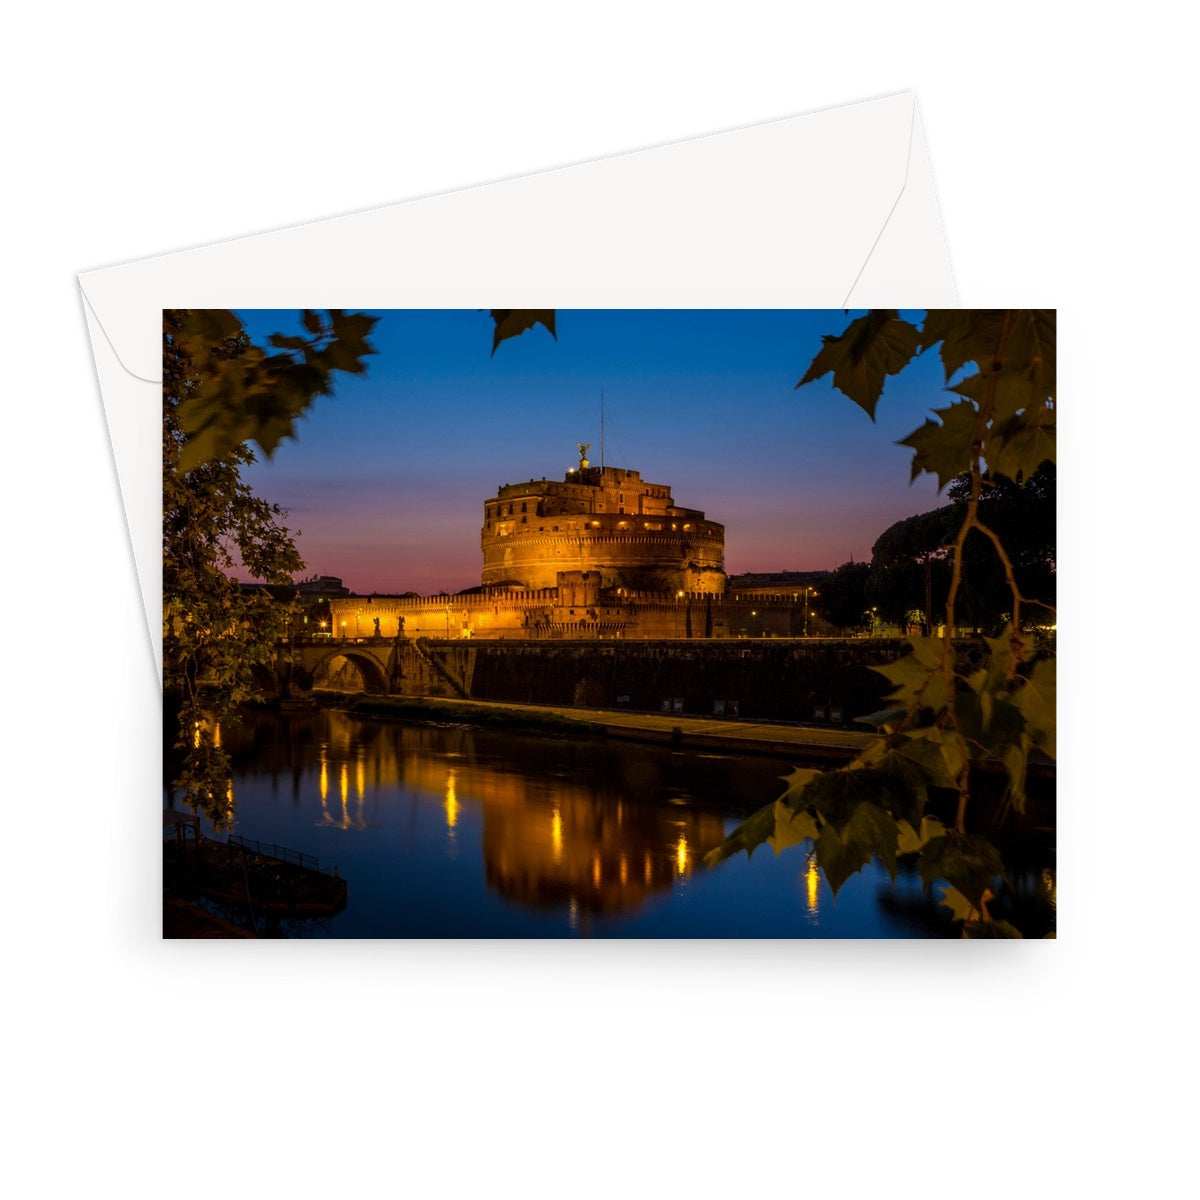 Castel sant'Angelo on the banks of the river tiber at night, Rome, Italy. Greeting Card